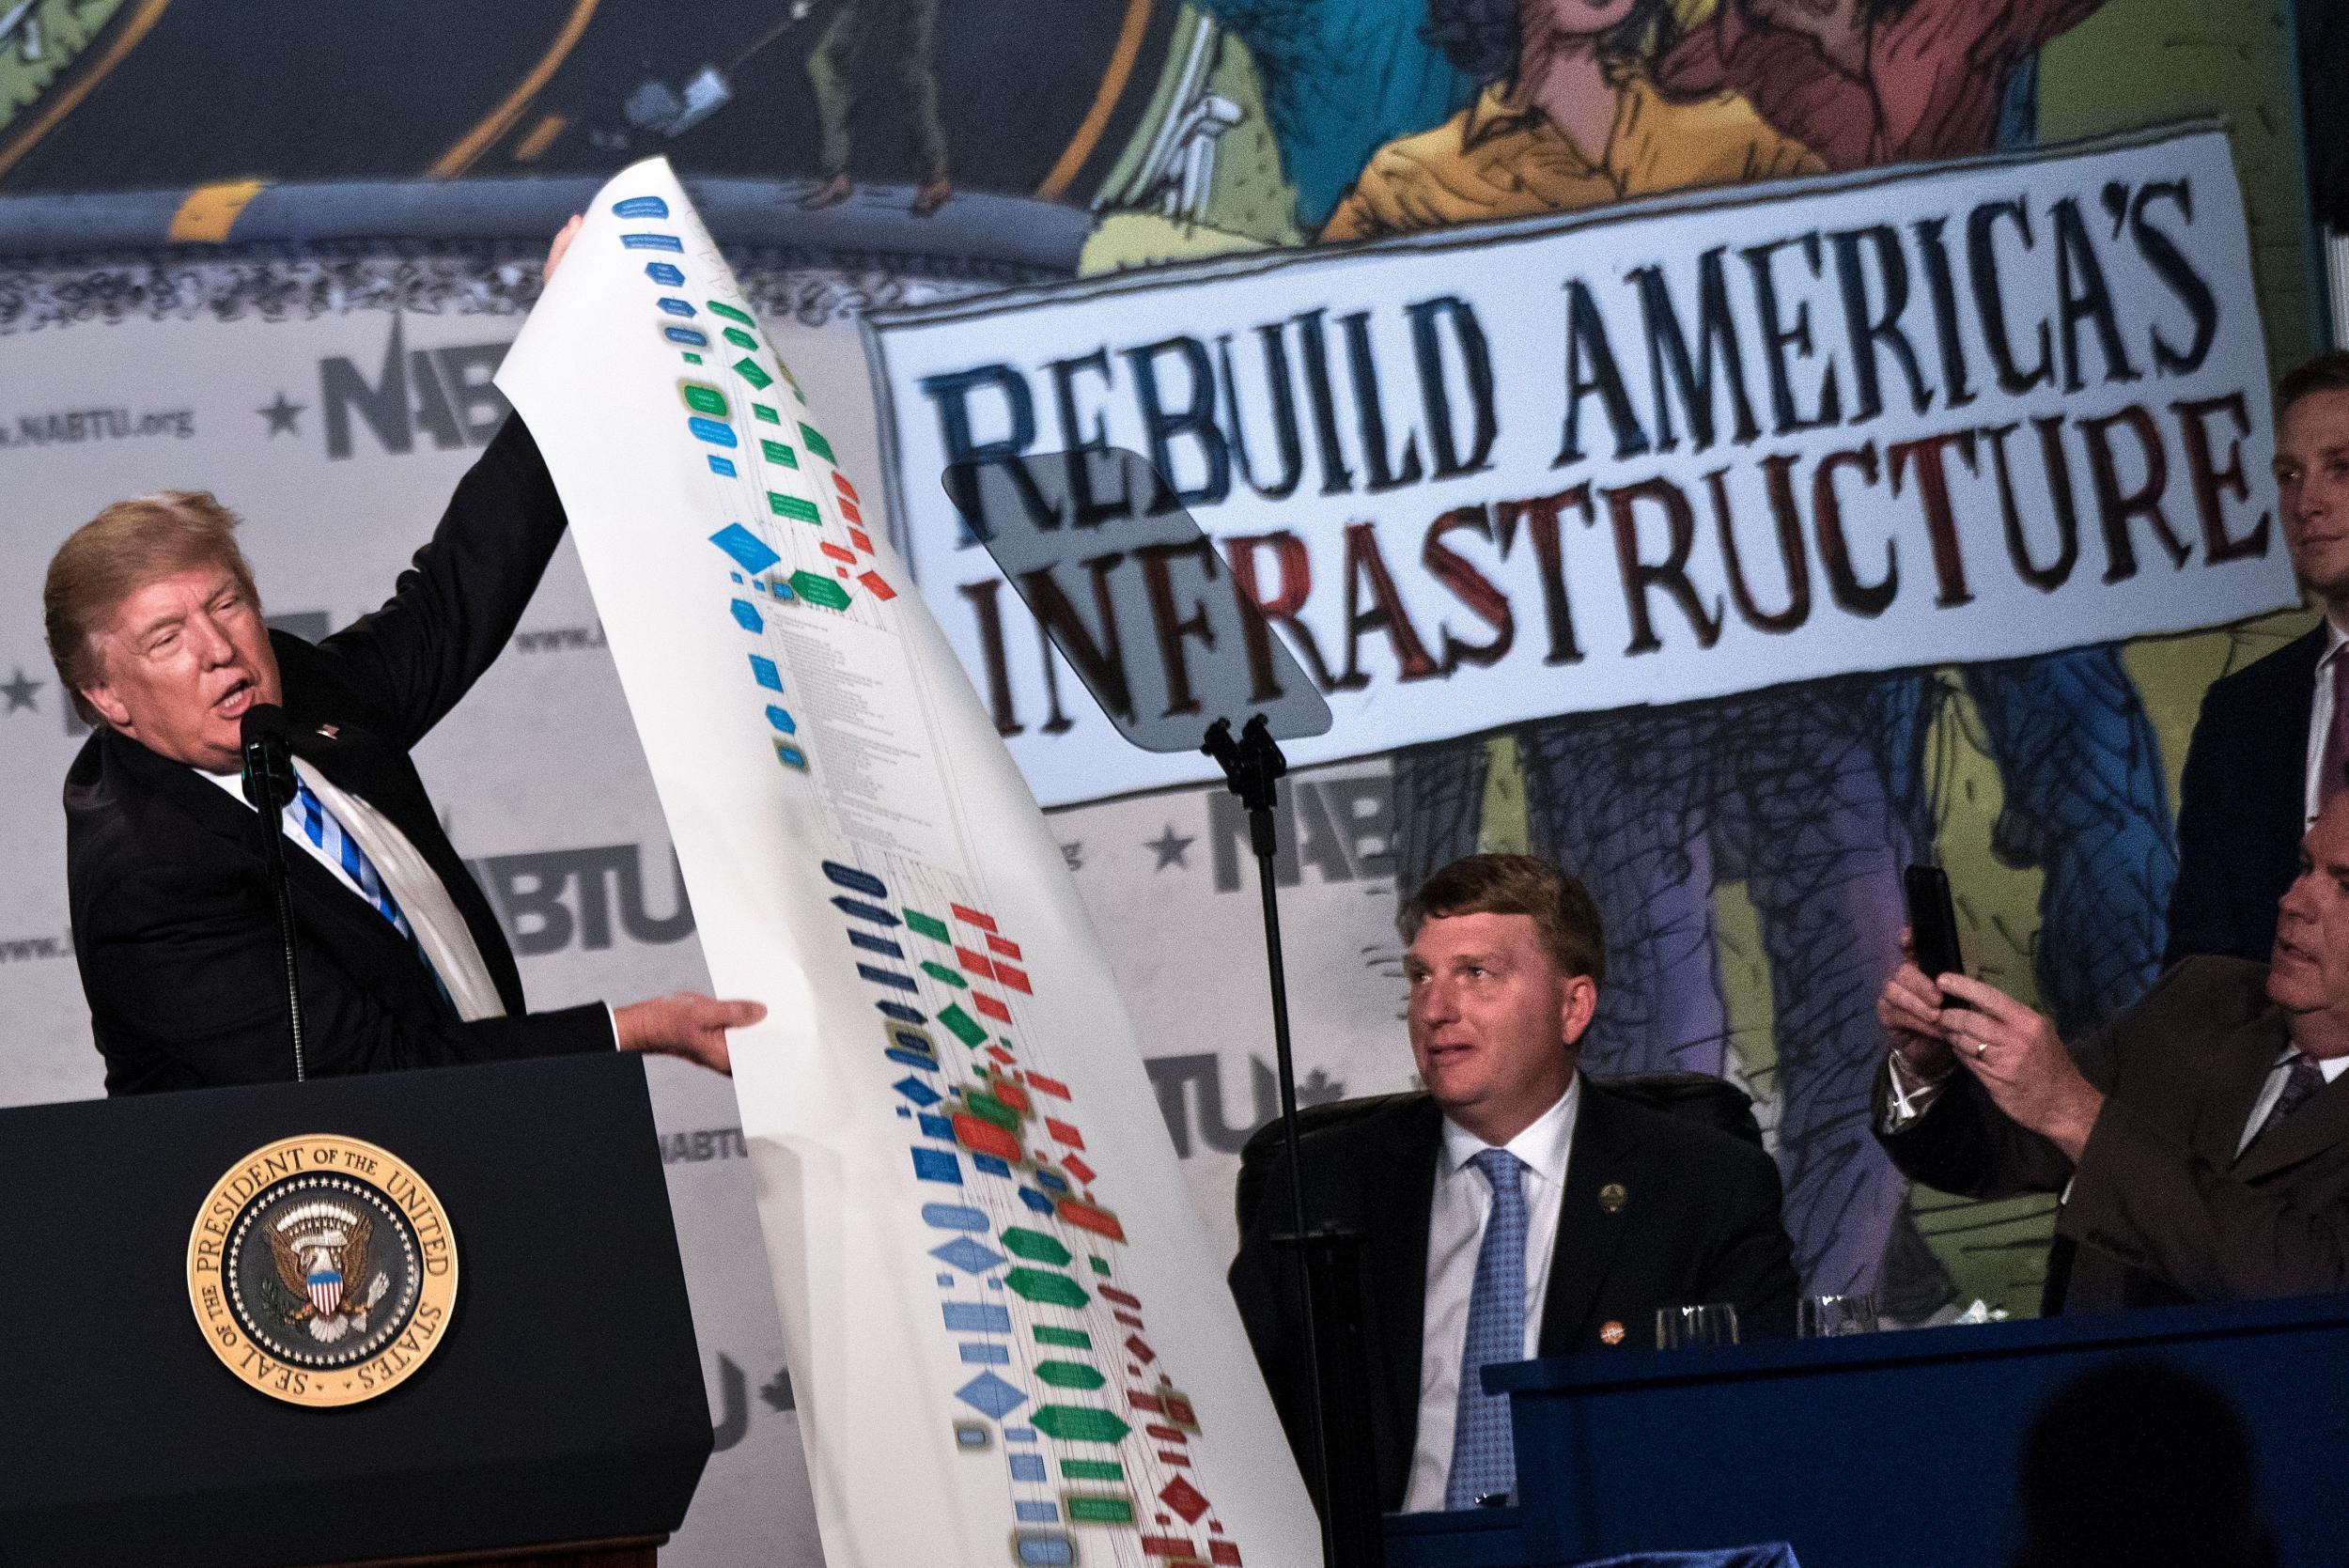 President Donald Trump spoke to the National Association of Business Trade Unions regarding infrastructure with the help of a visual aid